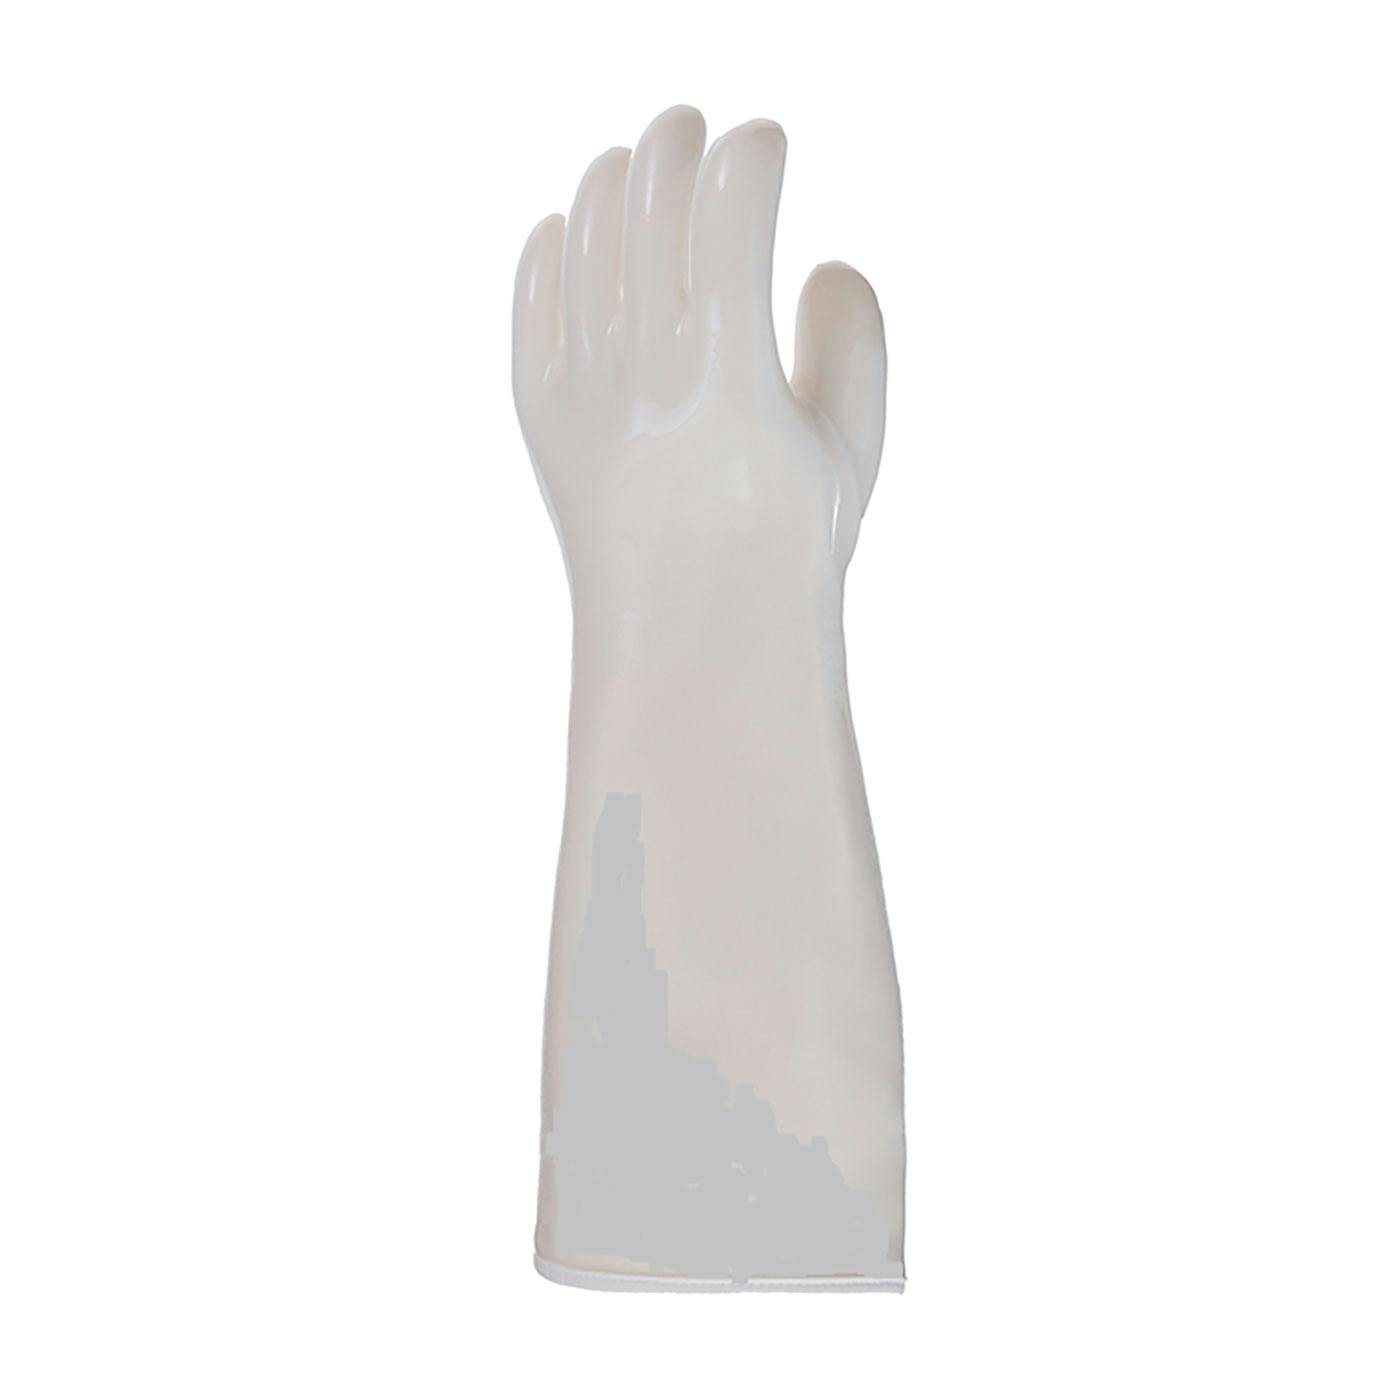 Heat & Cold Resistant Glove with Silicon Rubber Outer Shell and Nylon Lining - 23", White (75G) - L